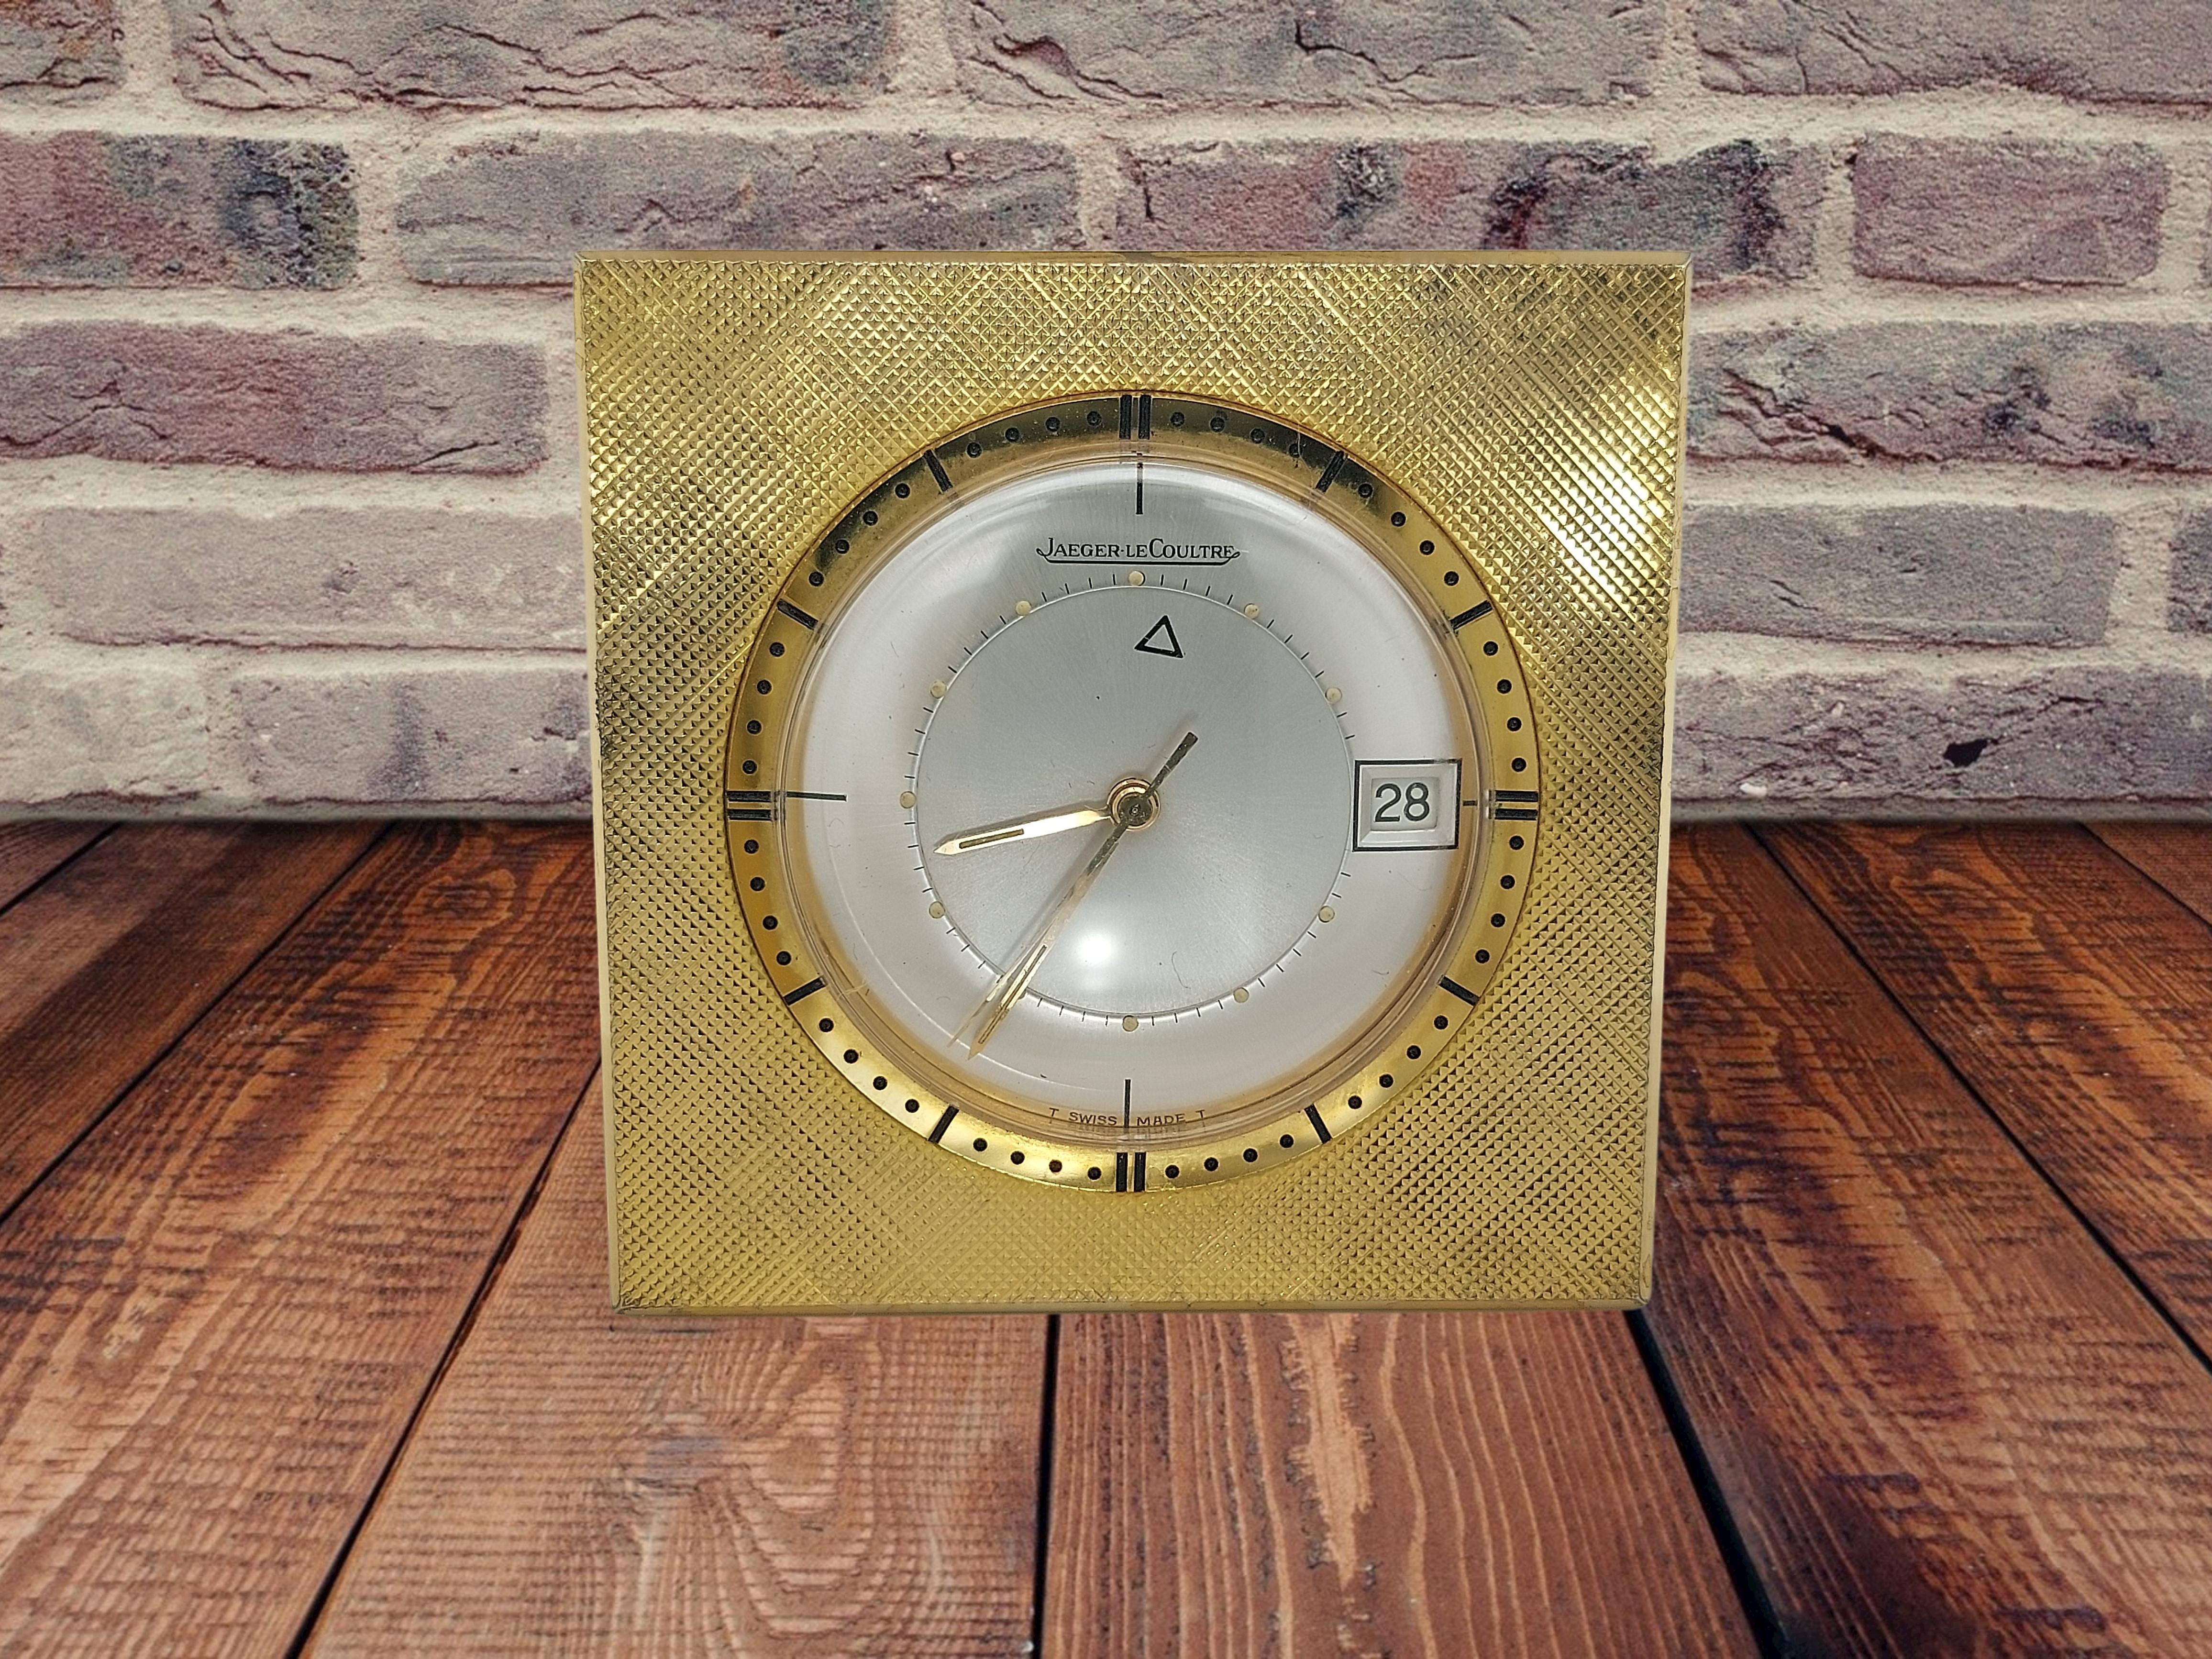 Travel Alarm Clock Made by Jaeger Le Coultre, Memovox Model, Switzerland For Sale 1